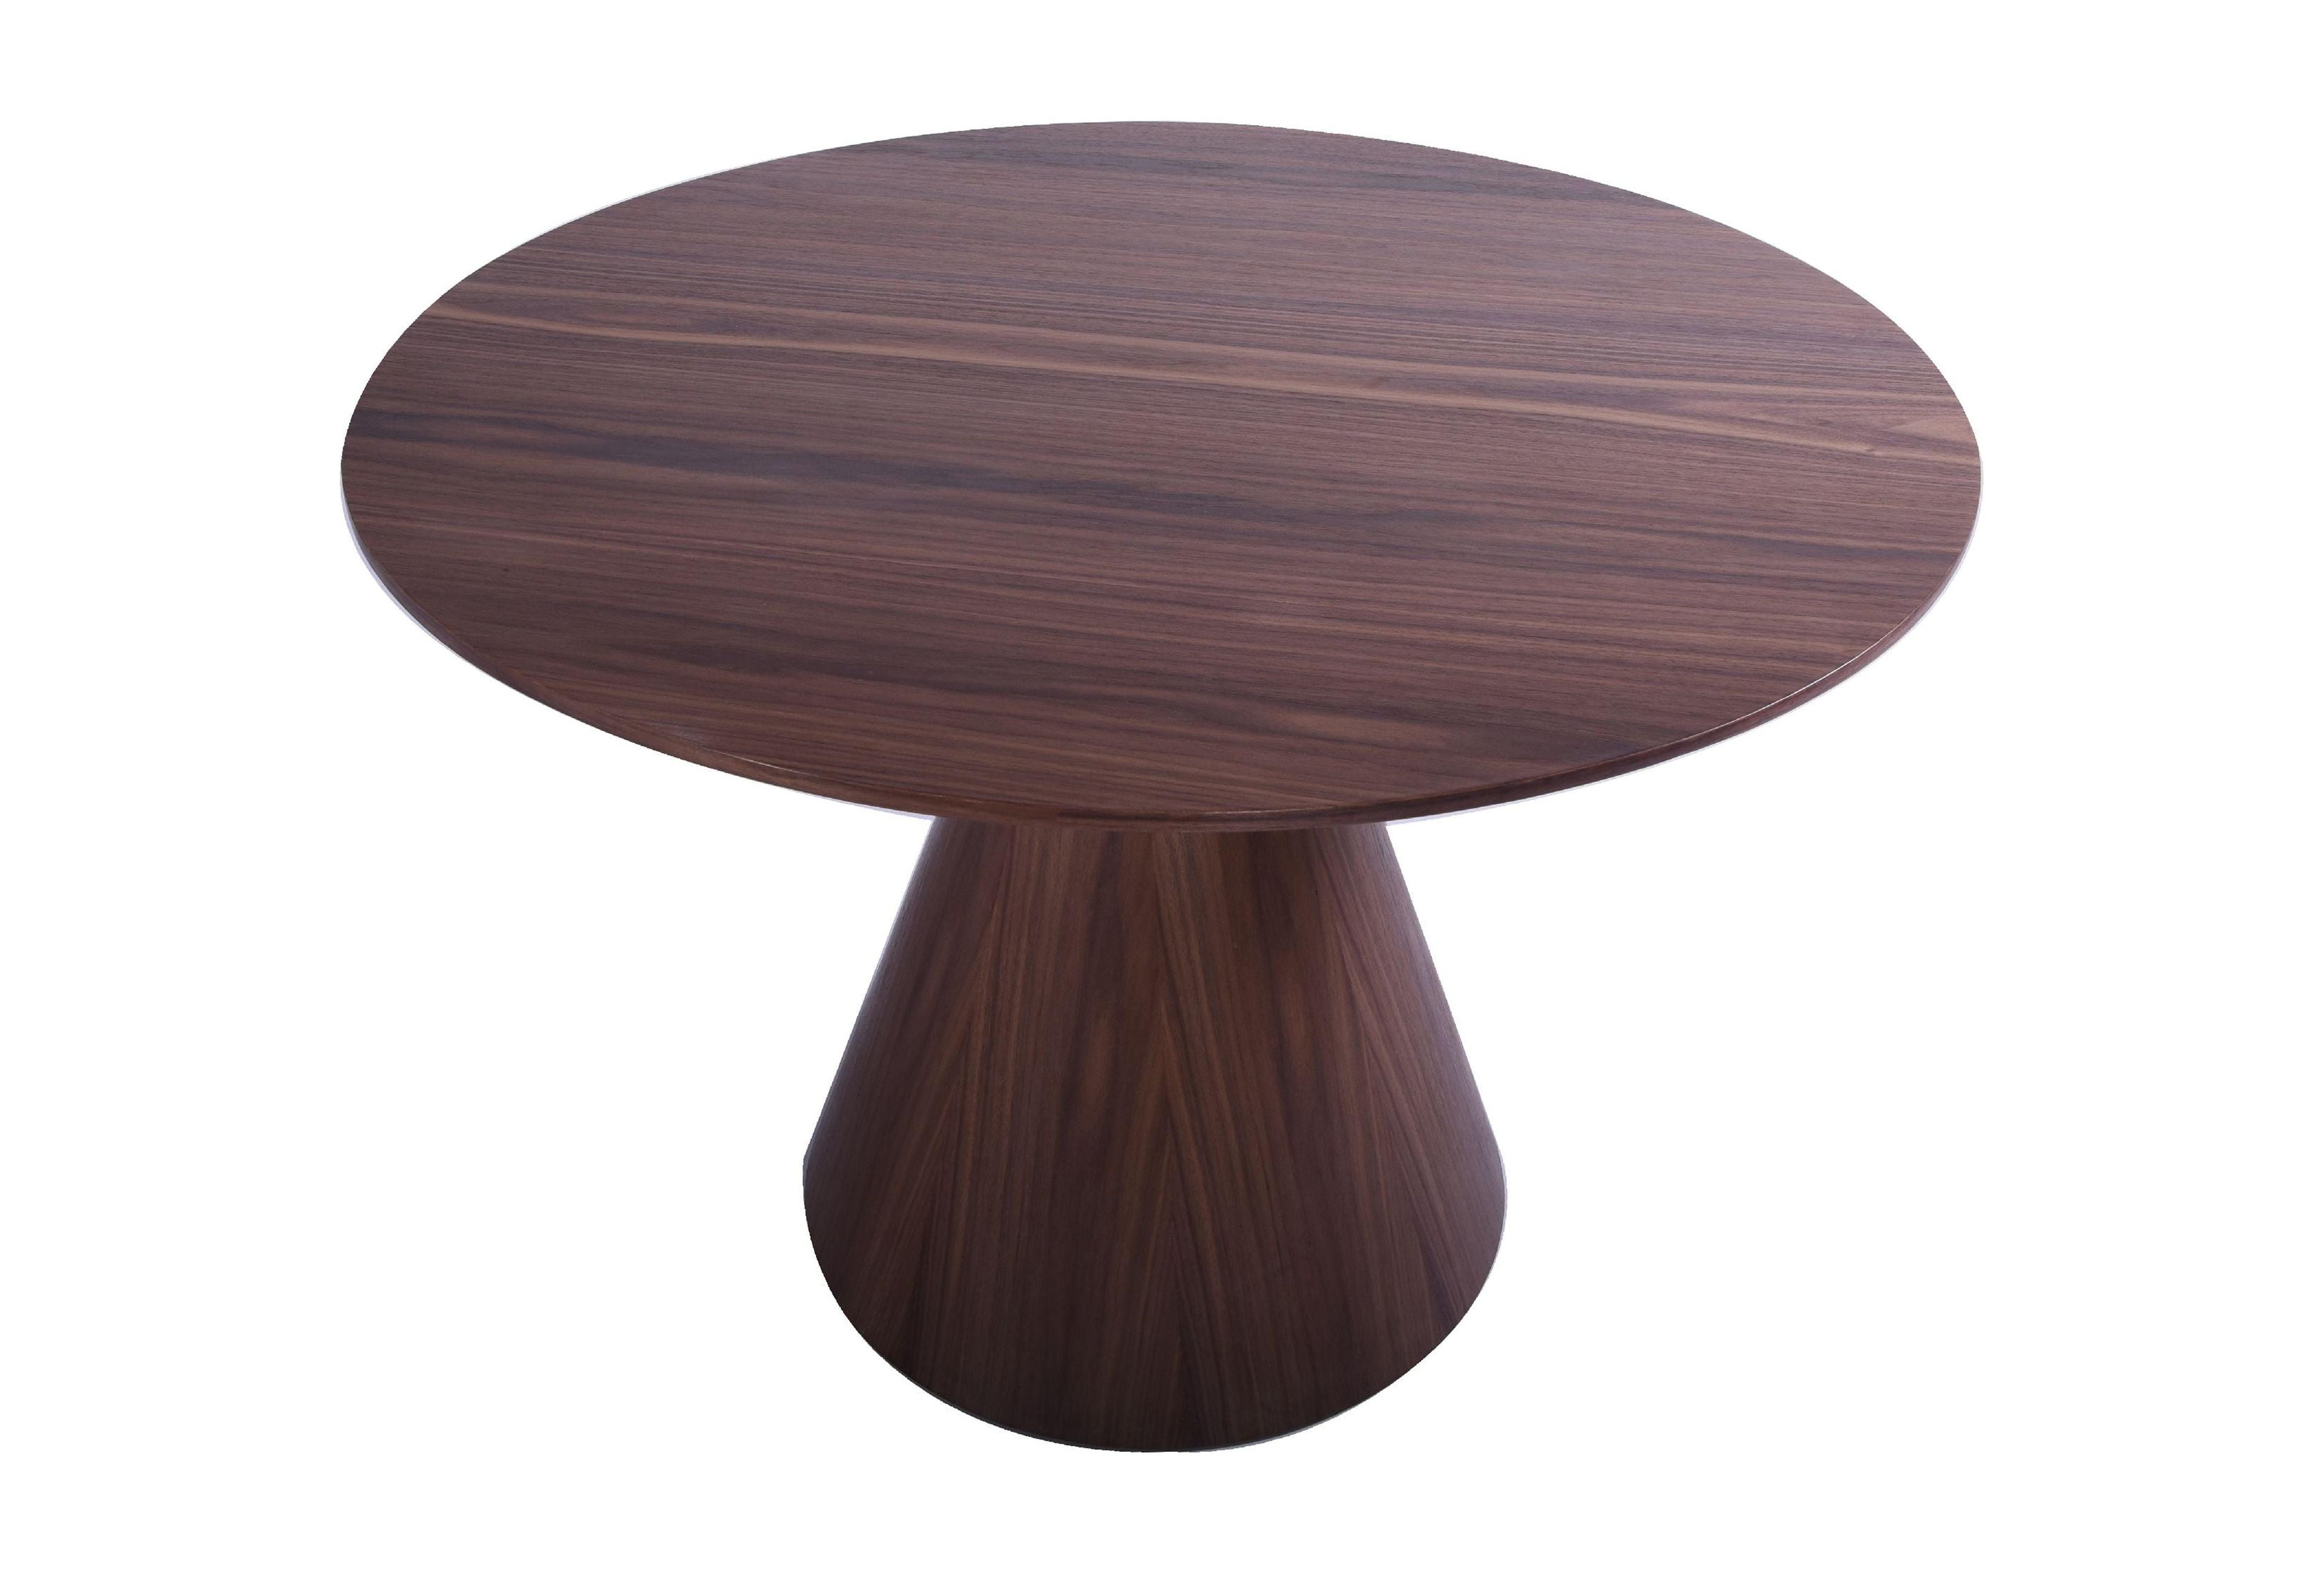 Modern Reclaimed Wood Round Dining Table with Veneer Finish